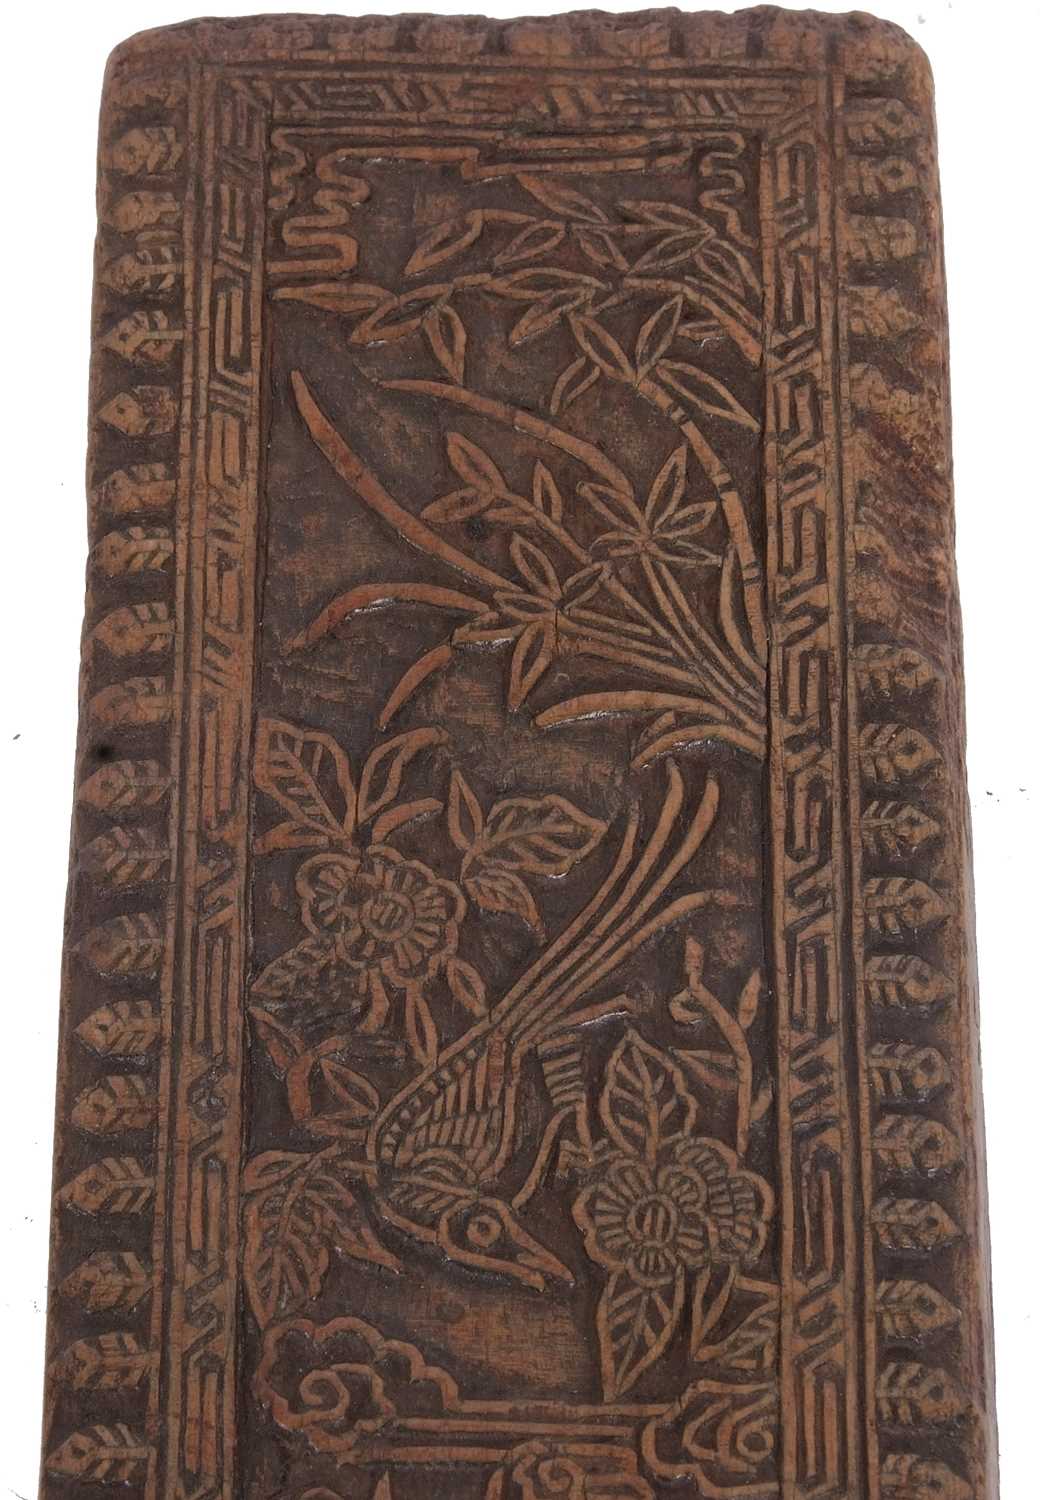 An antique Chinese wooden printing block decorated with figures, birds and foliage, 45 x 9cm - Image 6 of 7